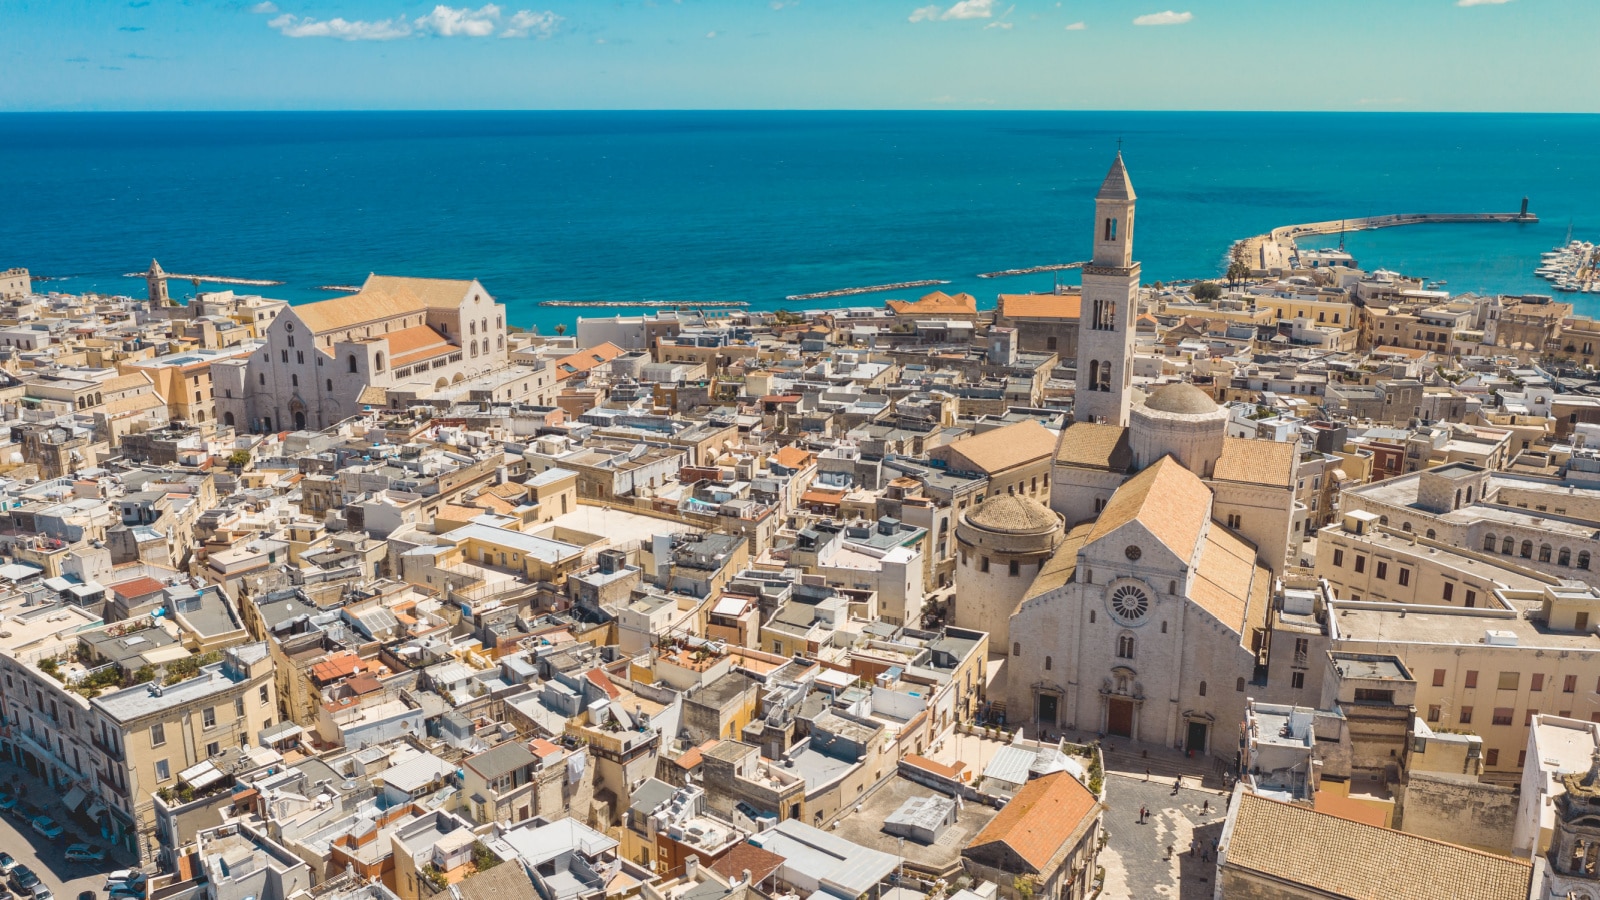 Aerial view of Bari old town. On the right there is Bari Cathedral (Saint Sabino), on the left there is "San Nicola Basilica", Bari second Cathedral. These churches were built during middle ages.